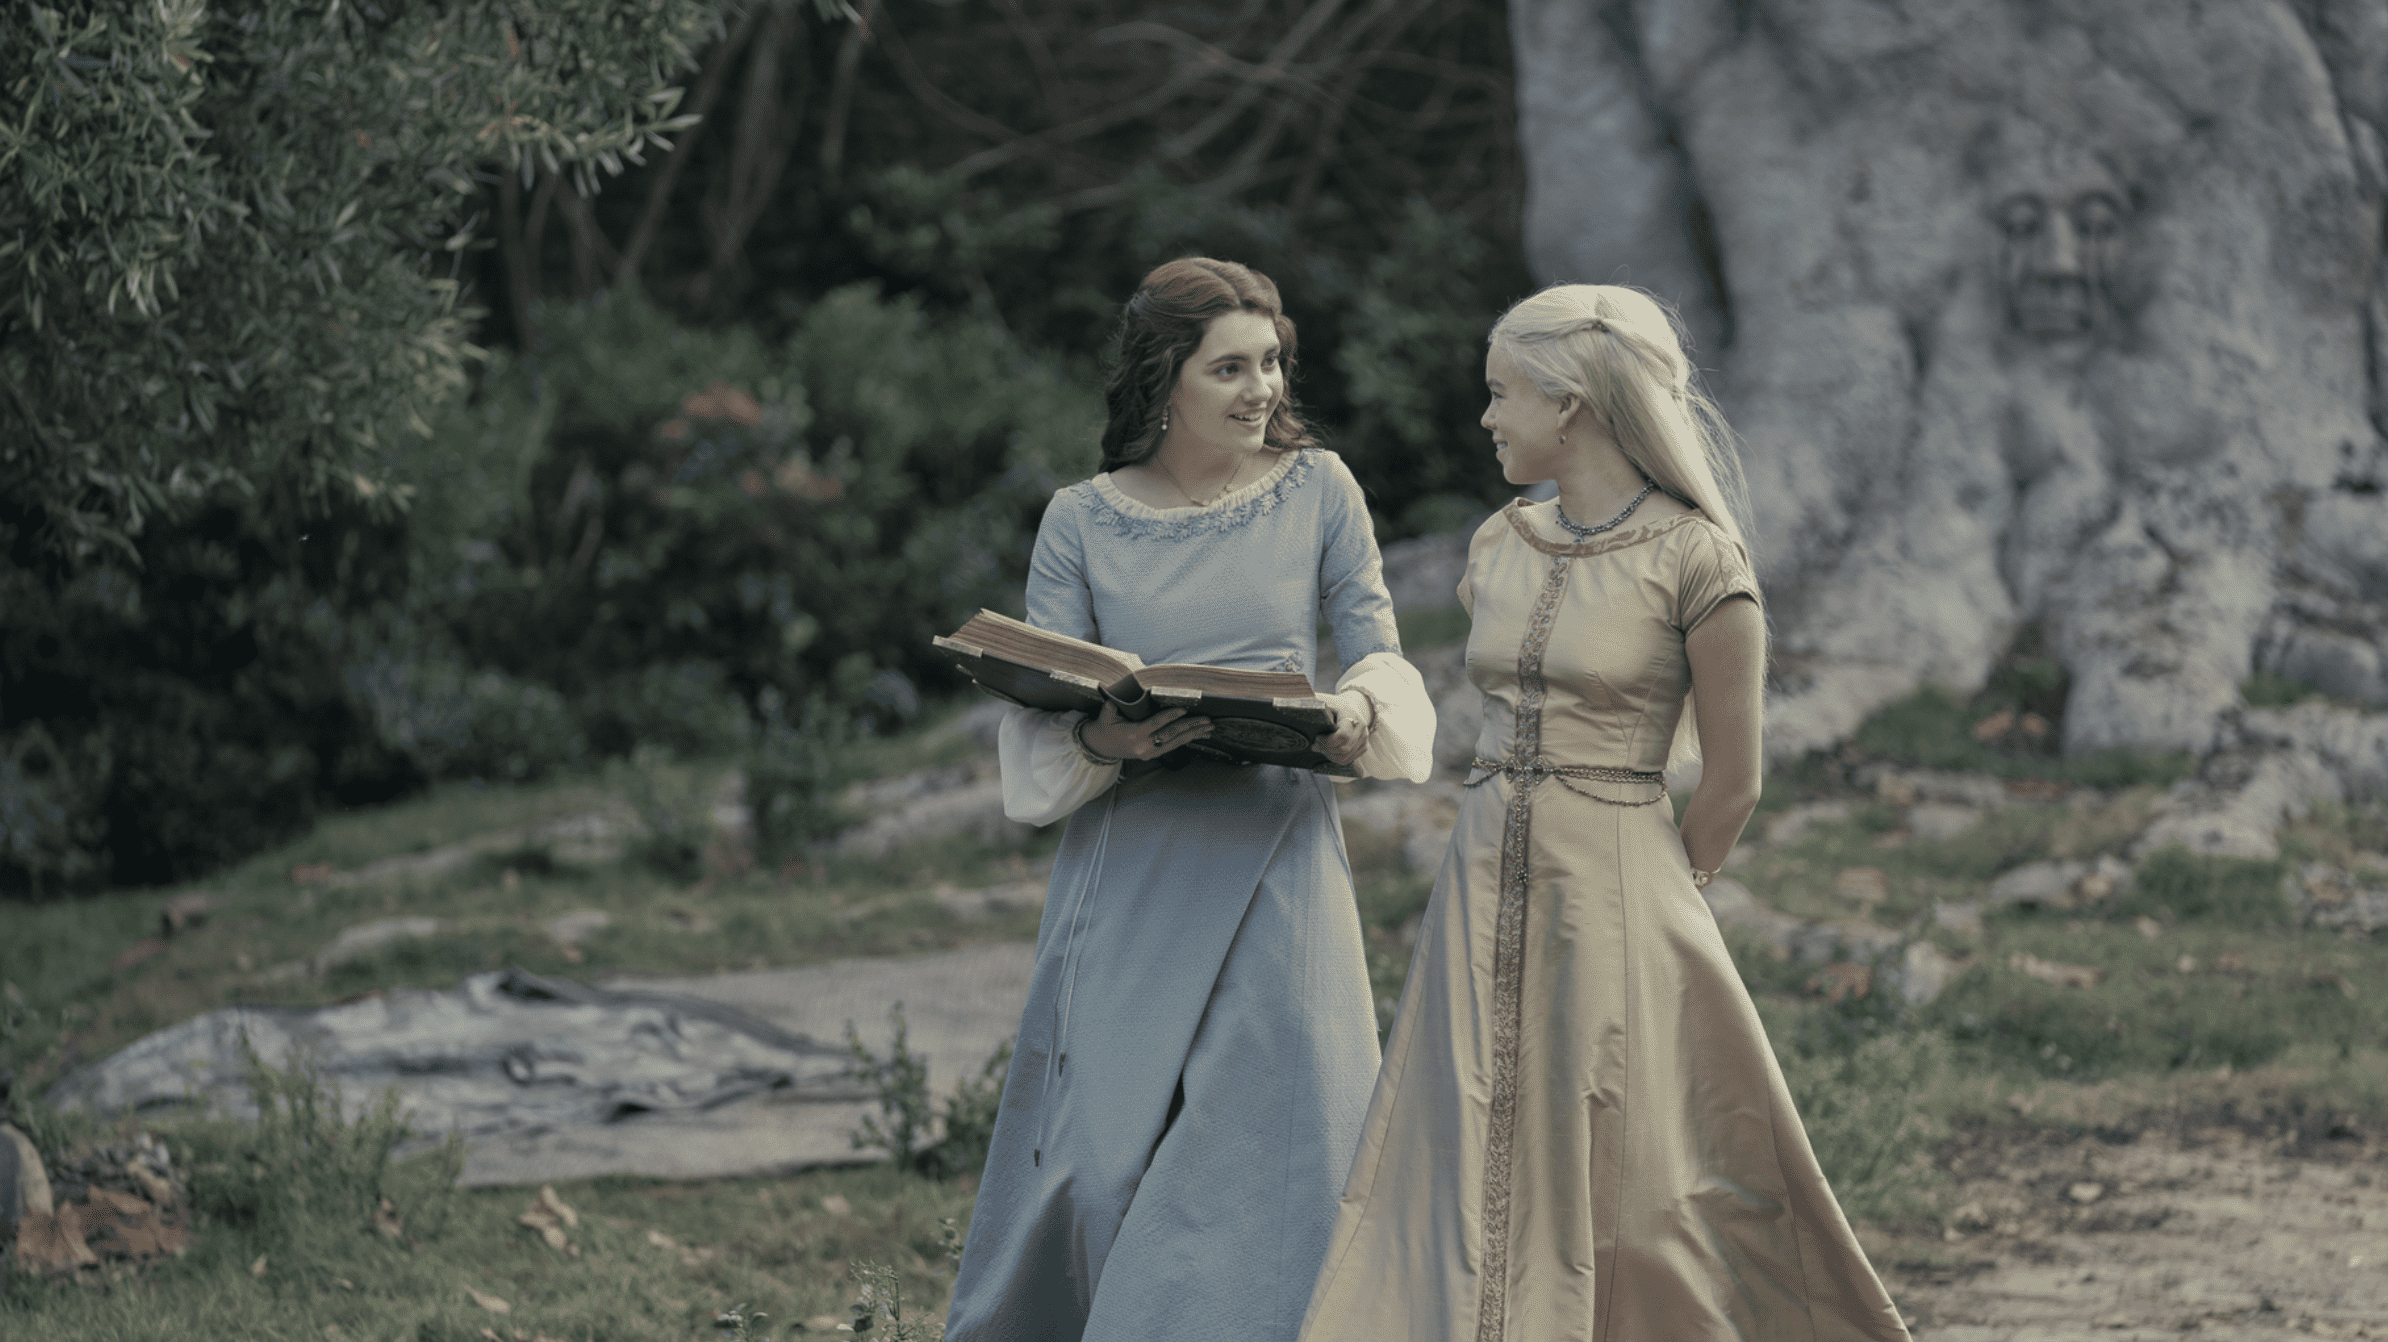 Two young women in medieval aristocratic garb chat over a book while standing in front of a tree with a face carved in it